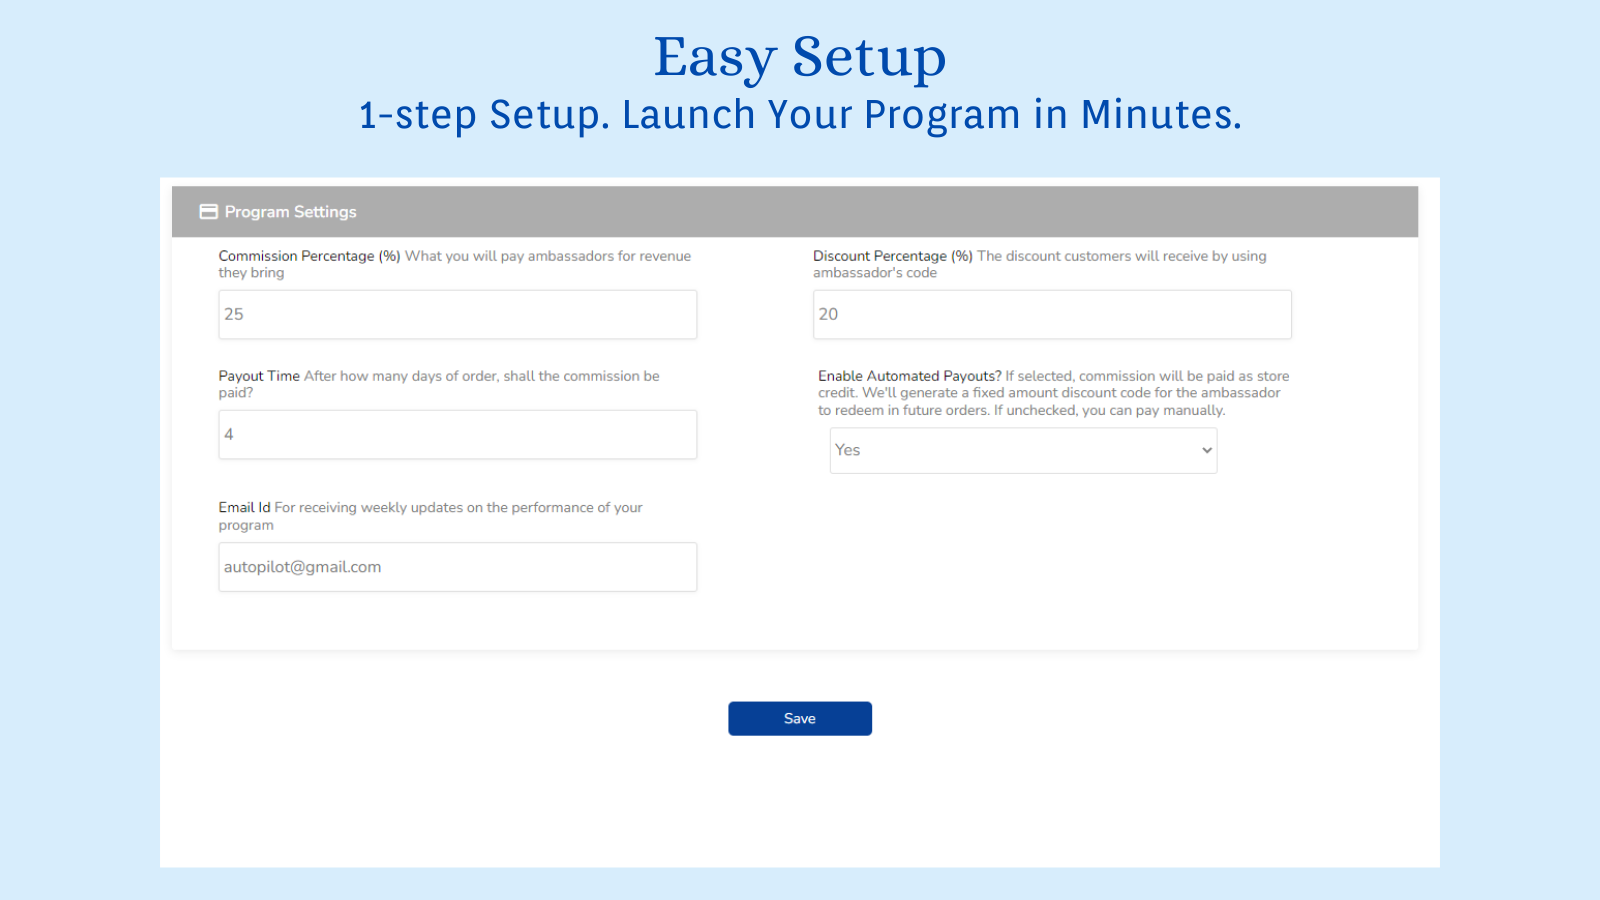 1-step Setup. Launch Your Program in Minutes.